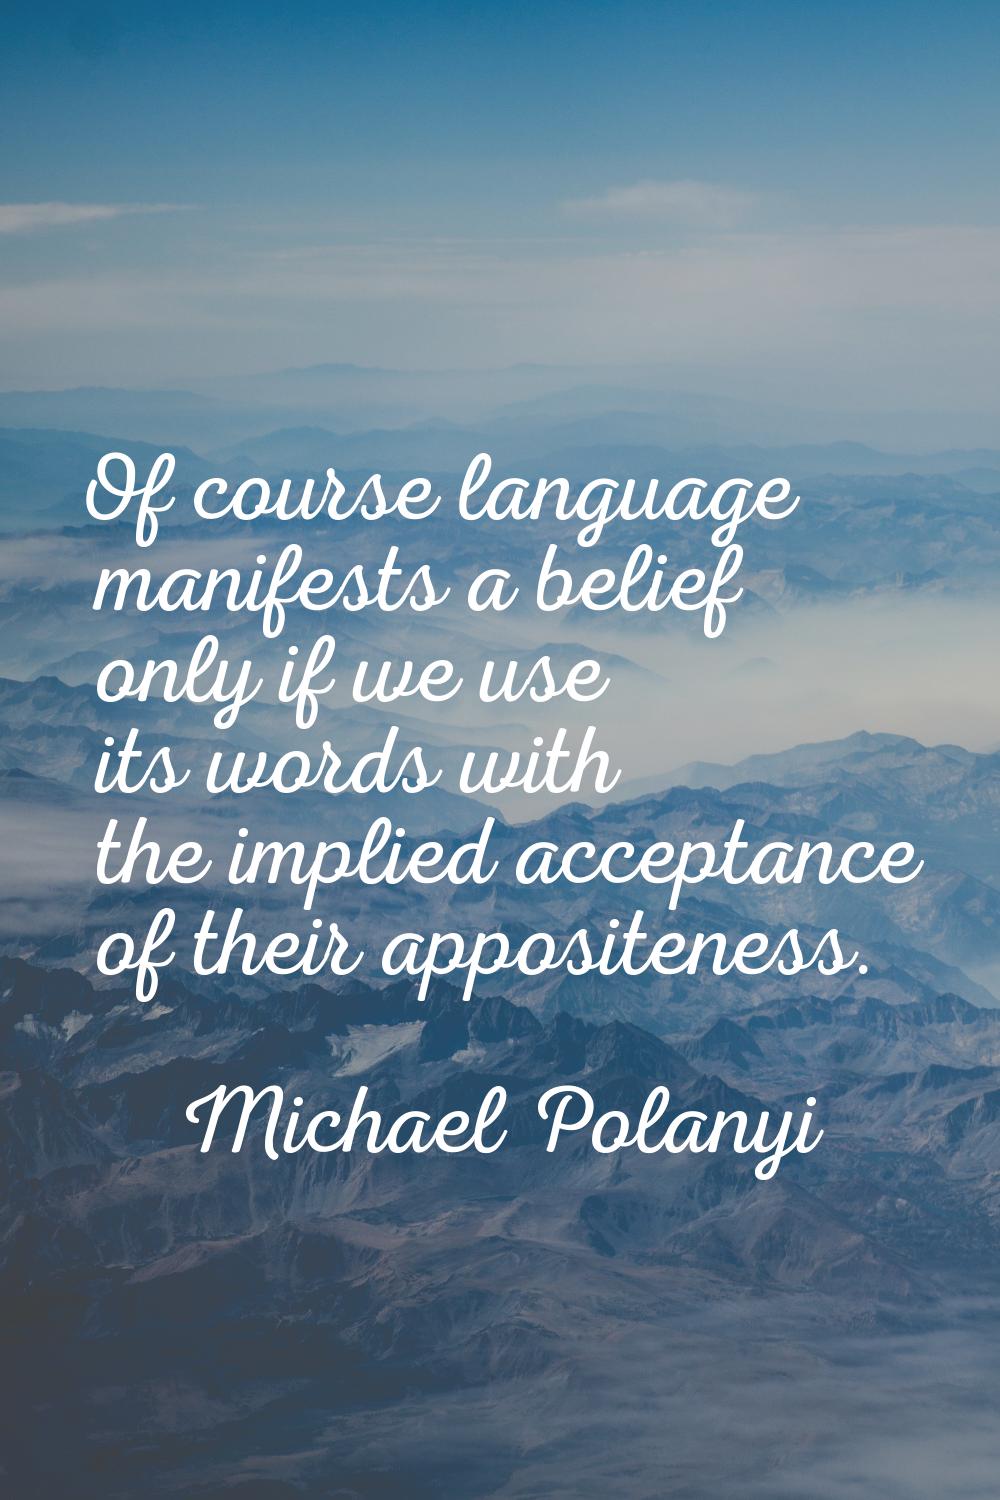 Of course language manifests a belief only if we use its words with the implied acceptance of their